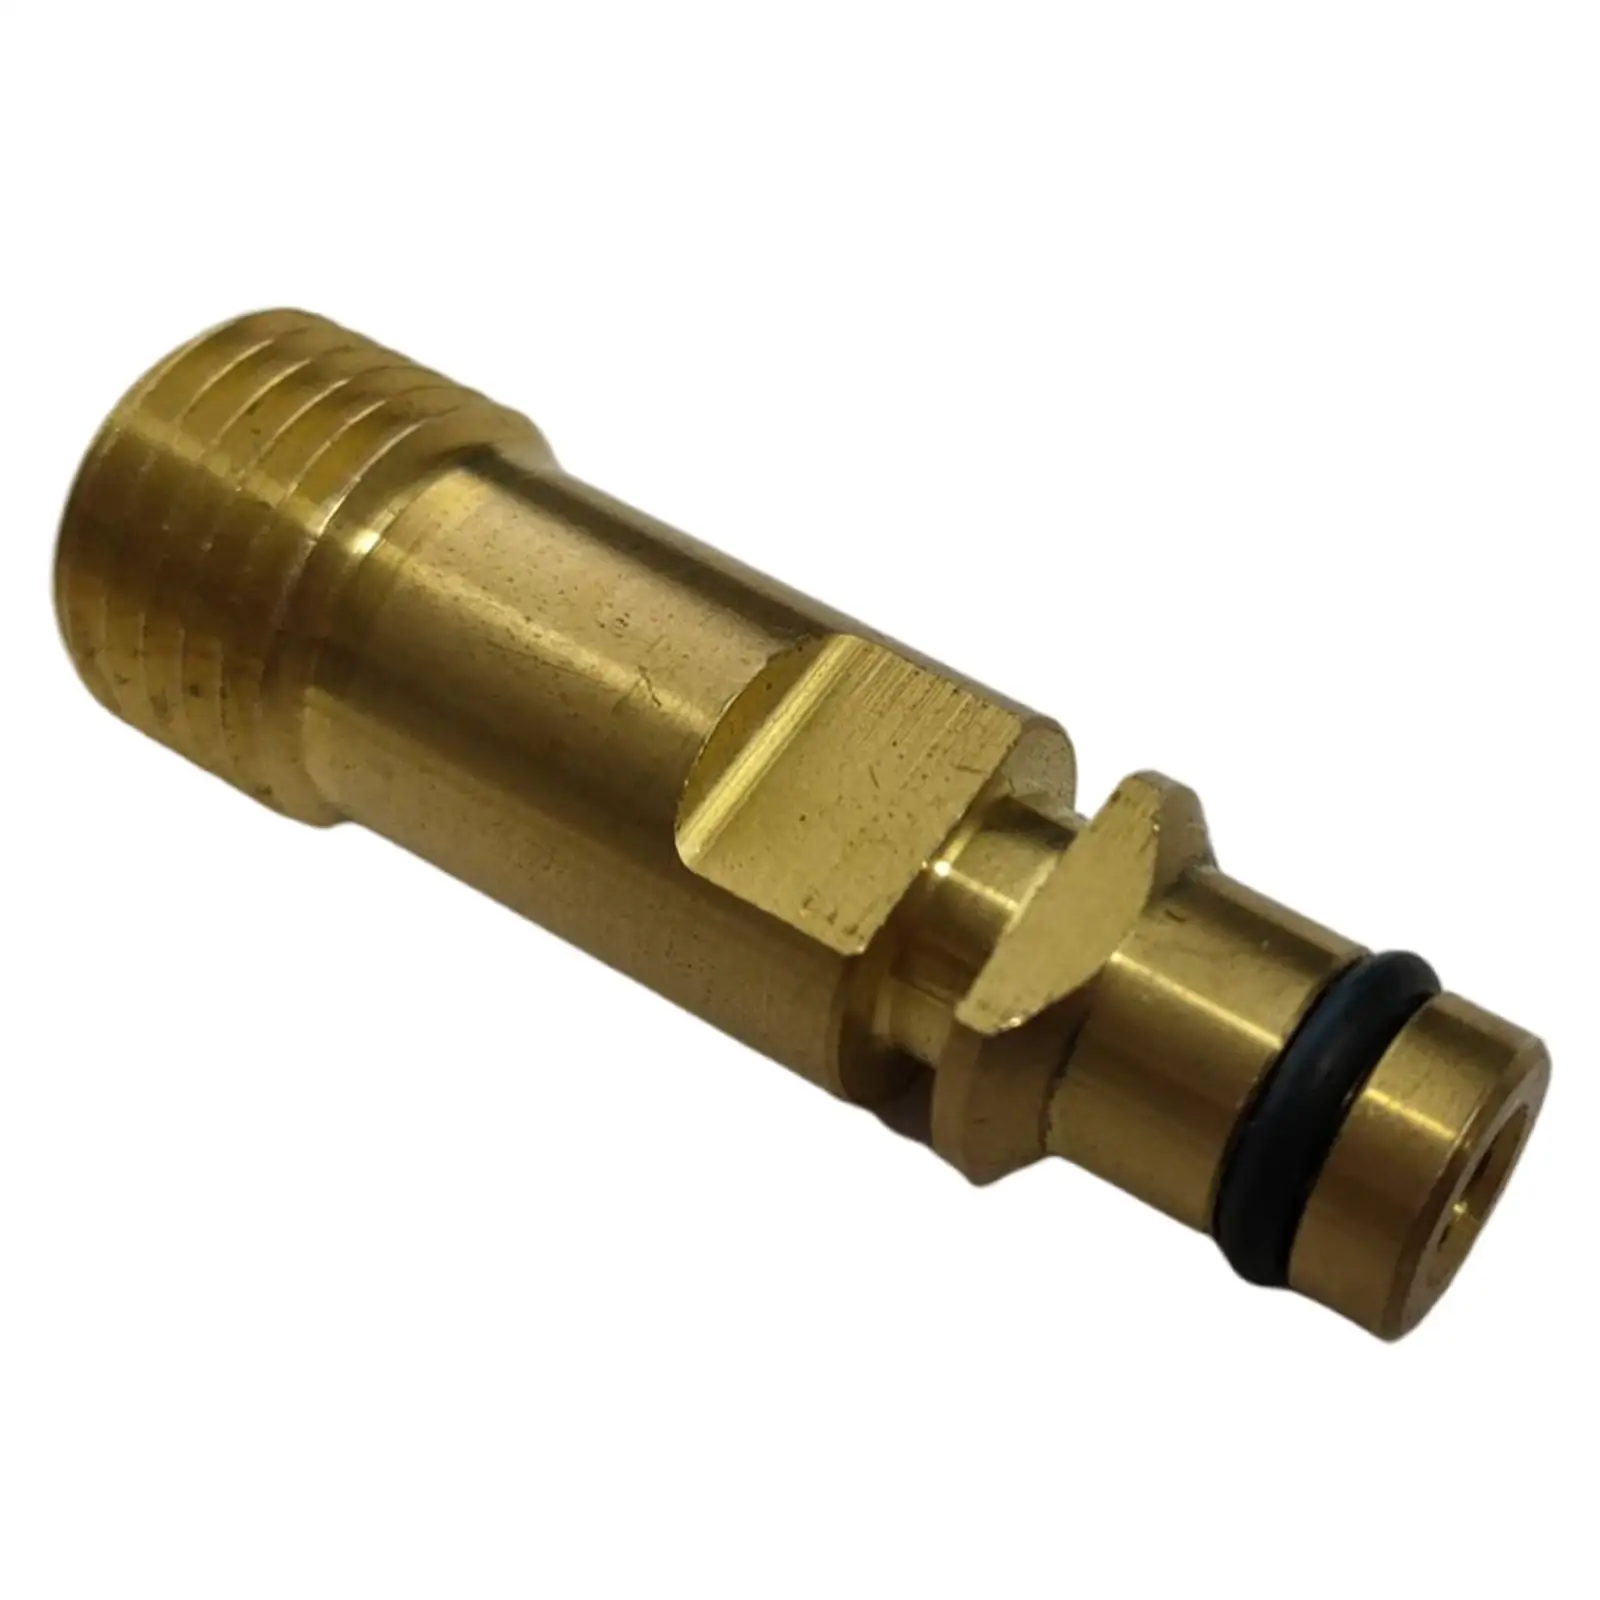 

Portable Pressure Washer Quick Connector Adaptor Easy to Install Wear-Resistant Tube Joint for High Pressure Washer Fittings